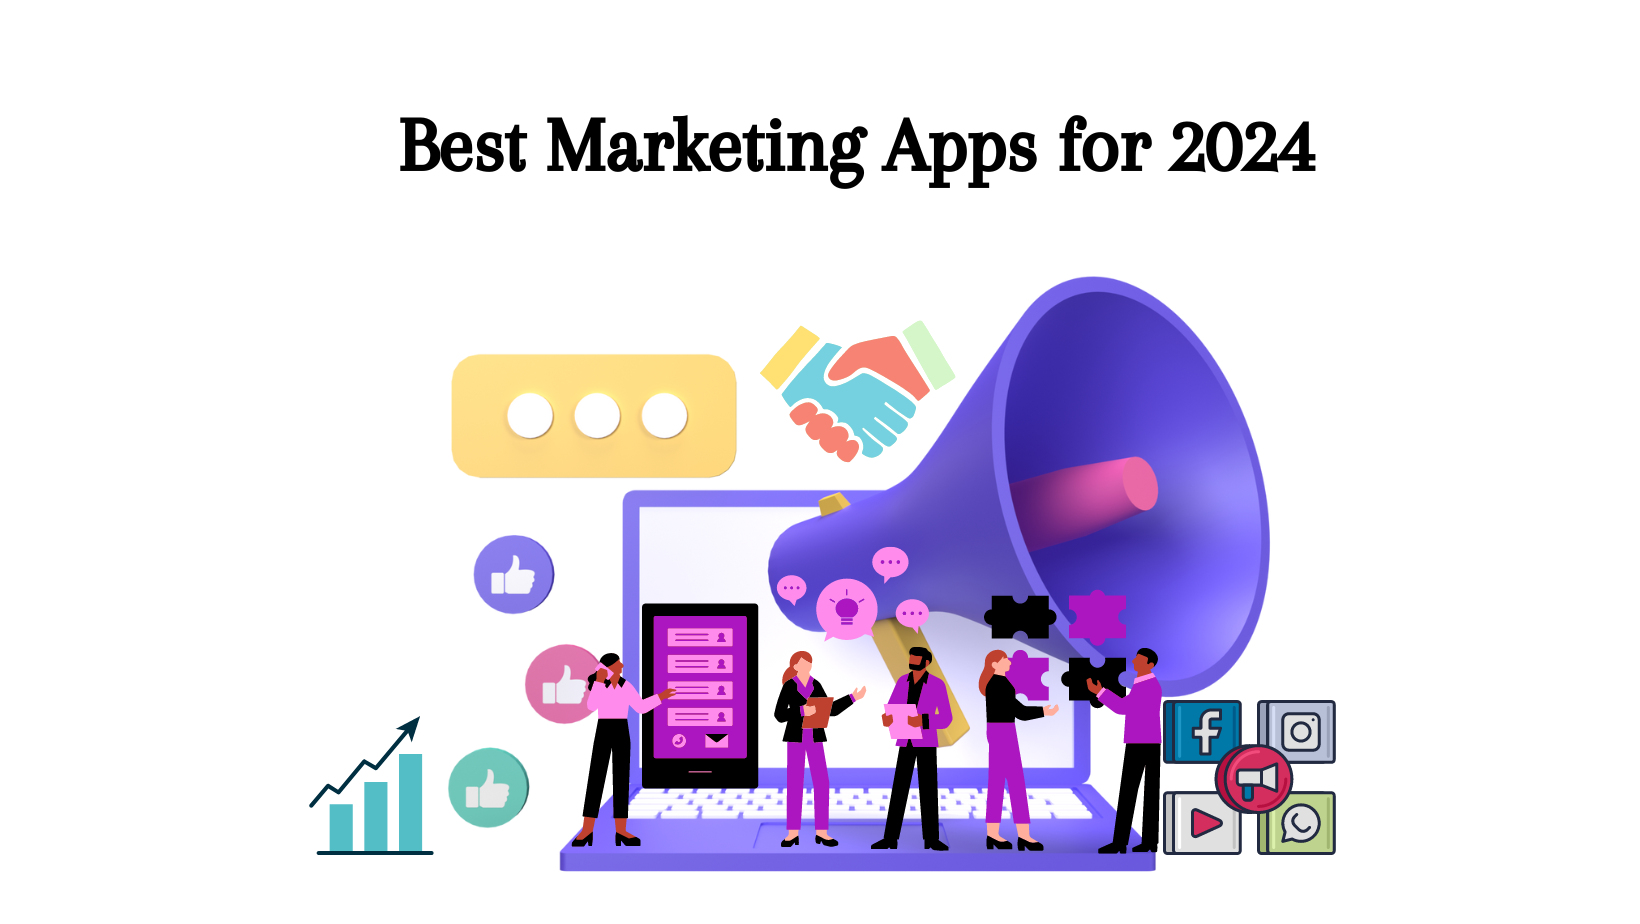 Best Marketing Apps for 2024